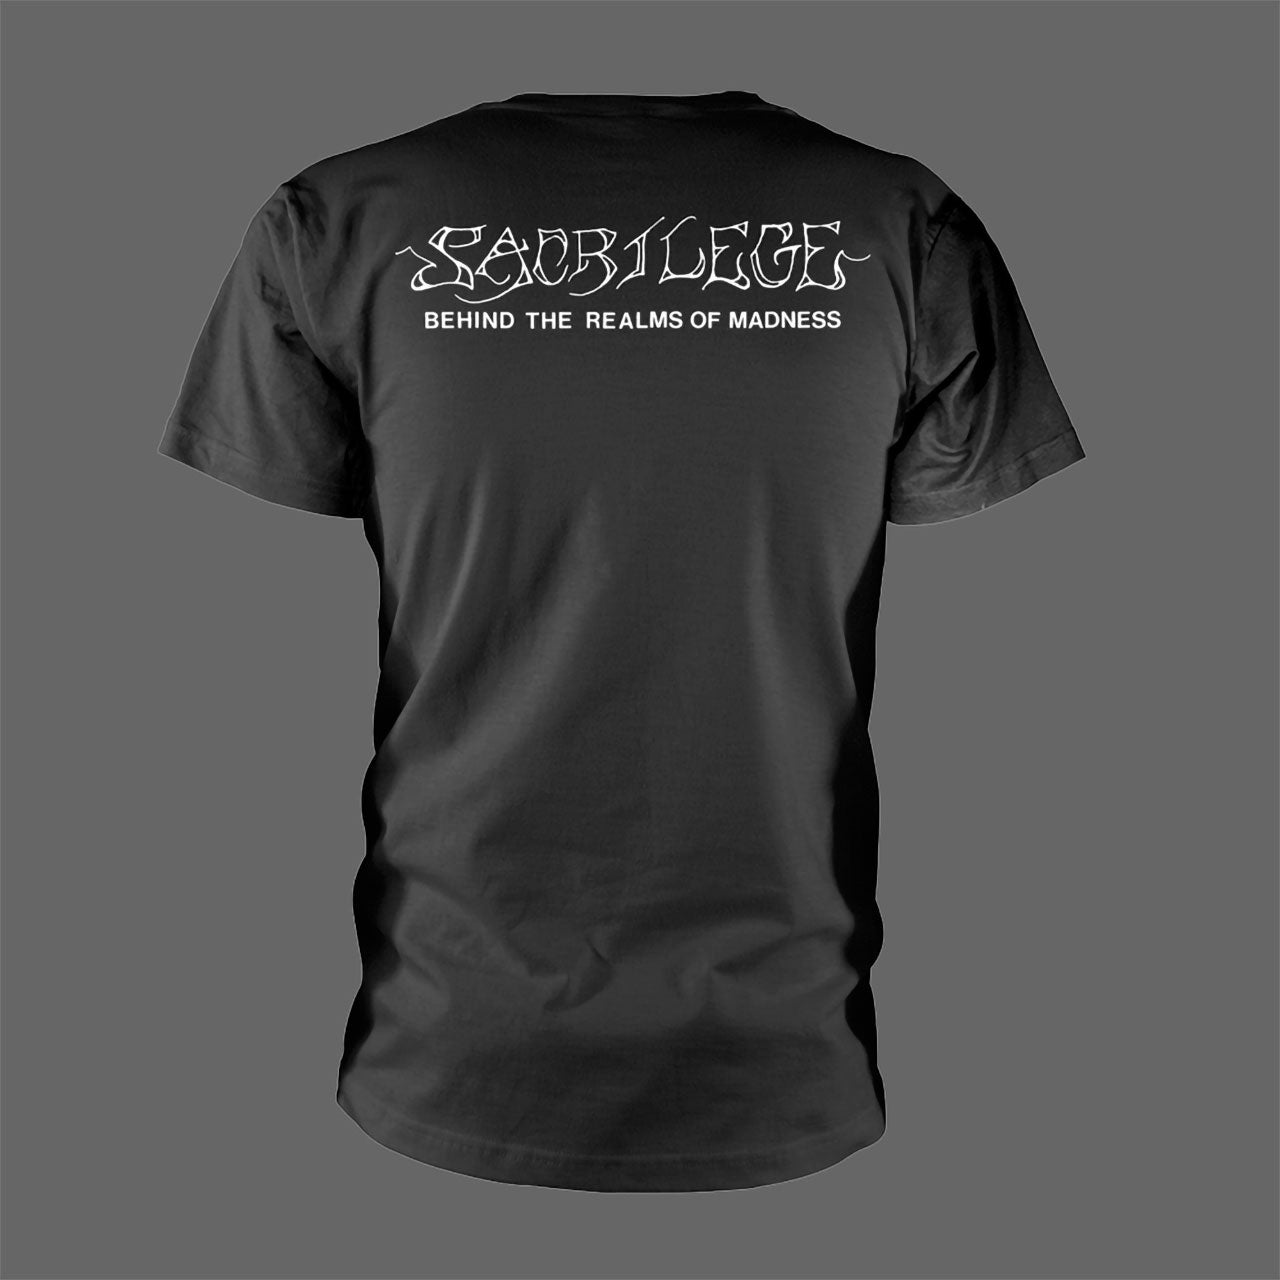 Sacrilege - Behind the Realms of Madness (T-Shirt)